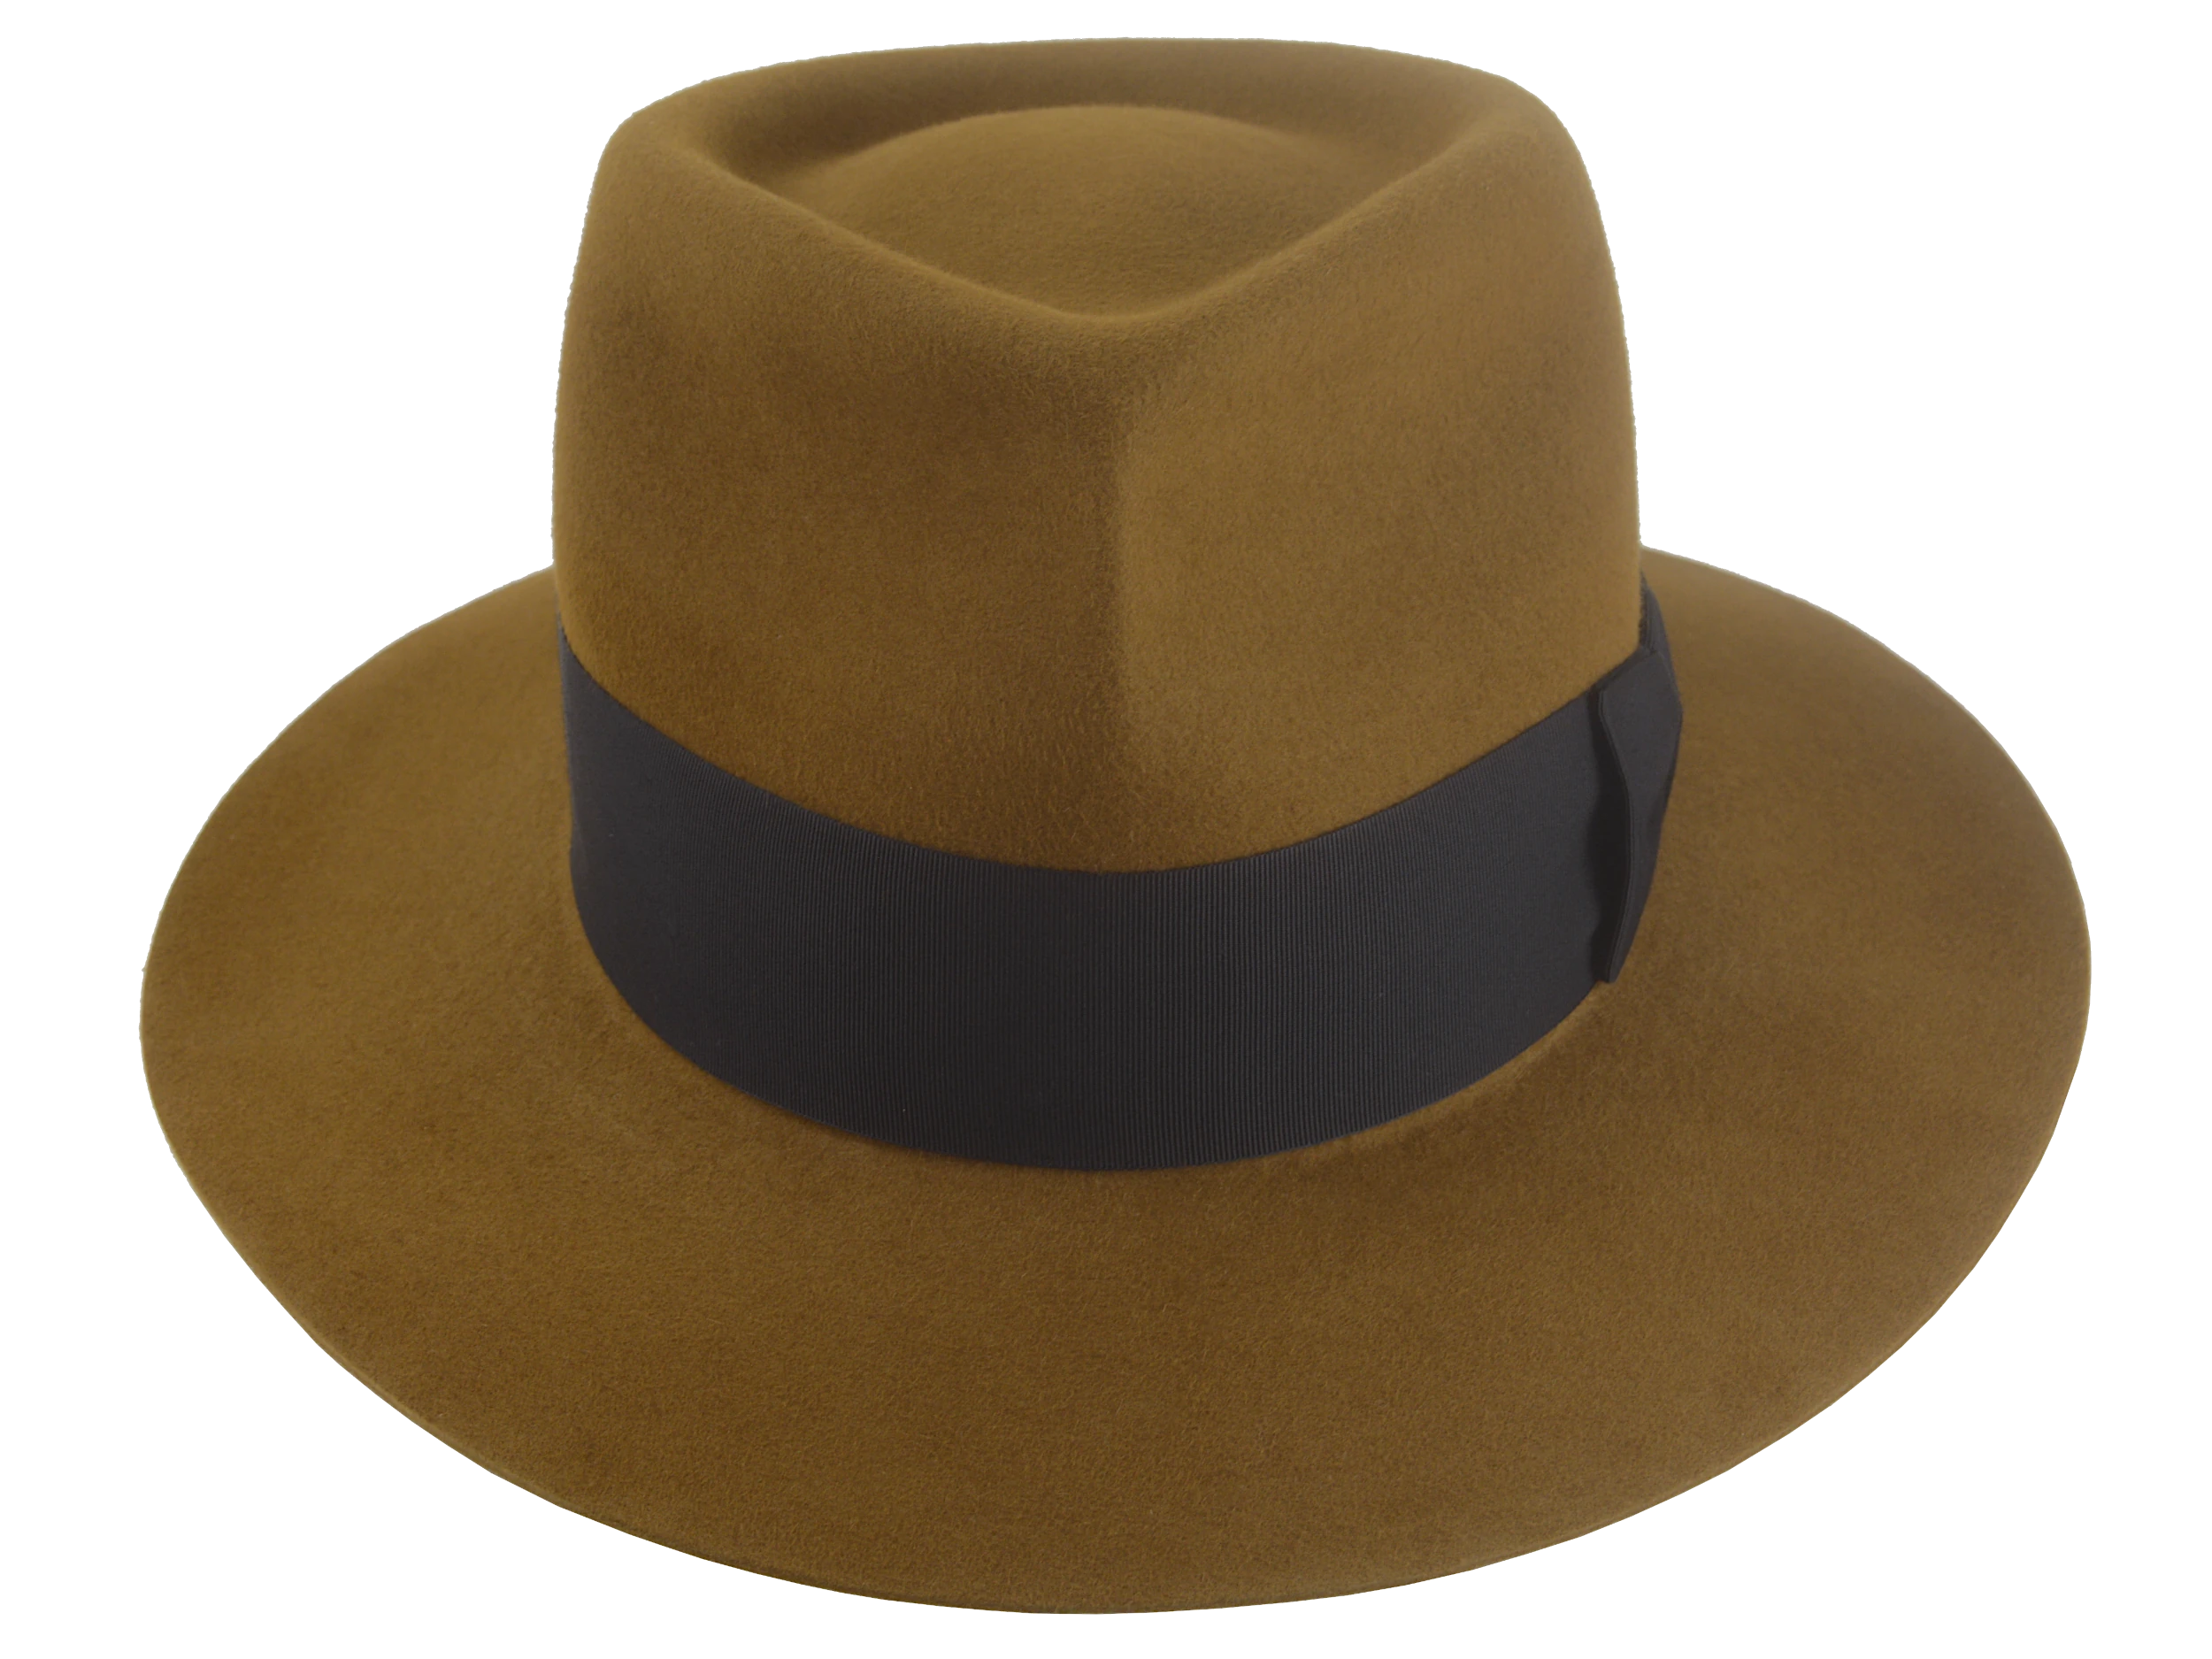 The Falcon: Frontal view showcasing hat's overall design | Agnoulita Hats